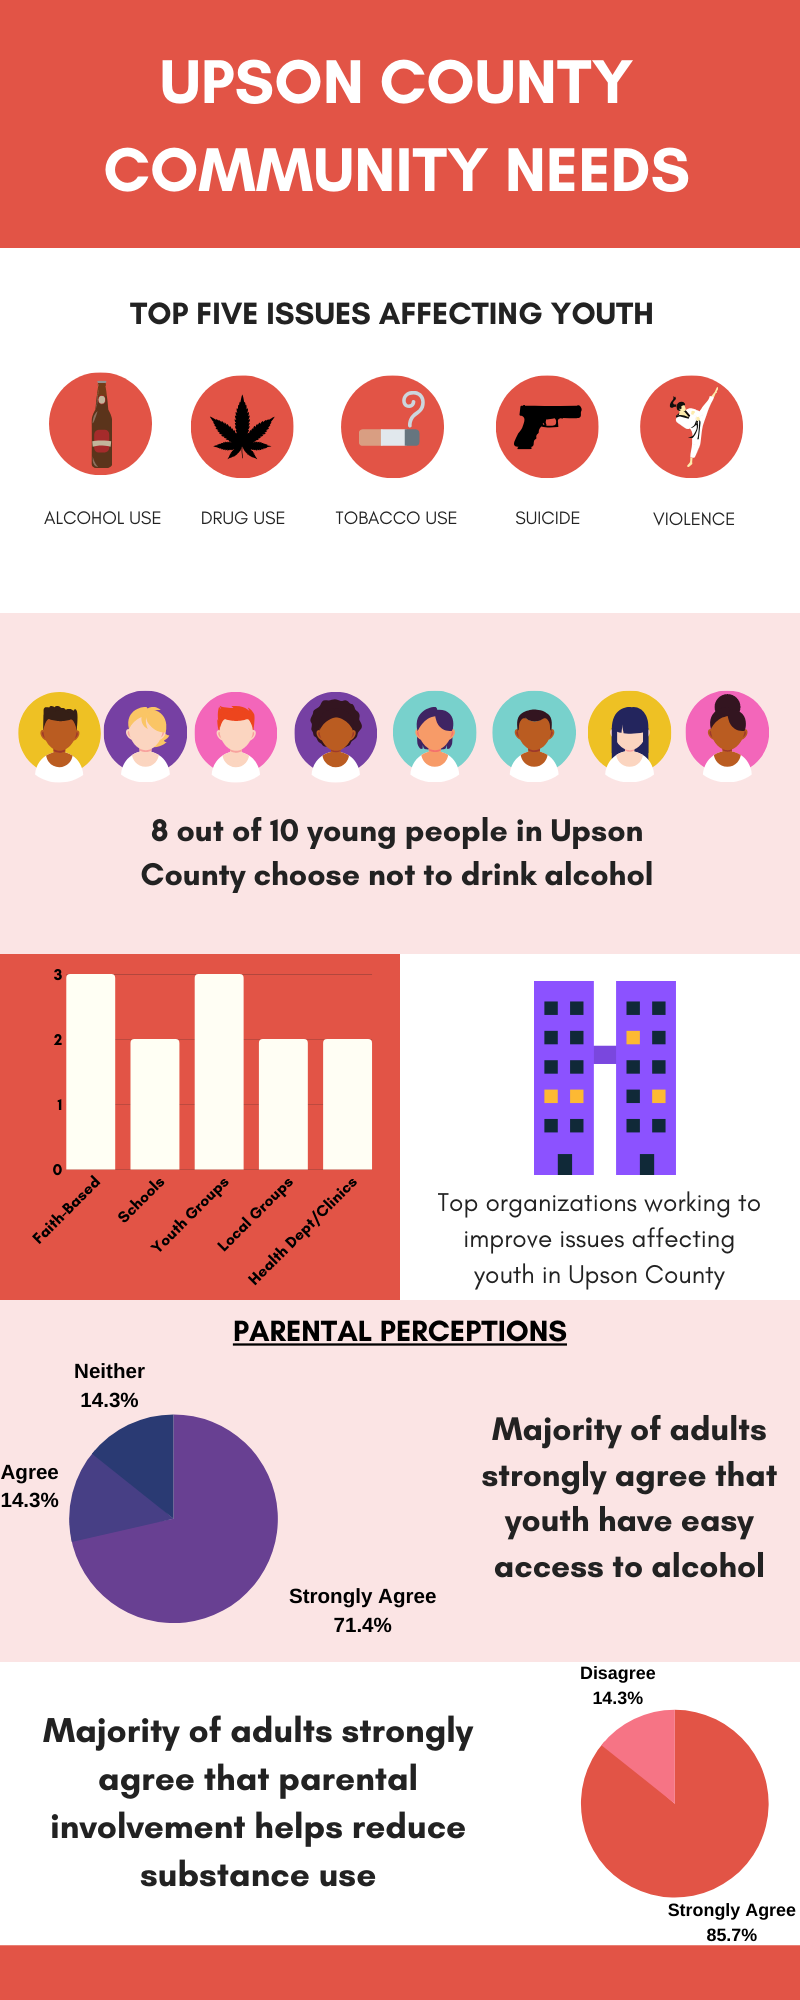 Infographic. The top 5 issues affecting youth in Upson County are alcohol use, drug use, tobacco use, suicide, and violence. 8 out of 10 young people in Upson County choose not to drink alcohol. Faith-based groups, schools, youth groups, local groups, and health clinics are the top organizations working to improve issues affecting youth. The majority of adults strongly  agree that youth have easy access to alcohol. The majority of adults strongly agree that parental involvement helps reduce substance use.